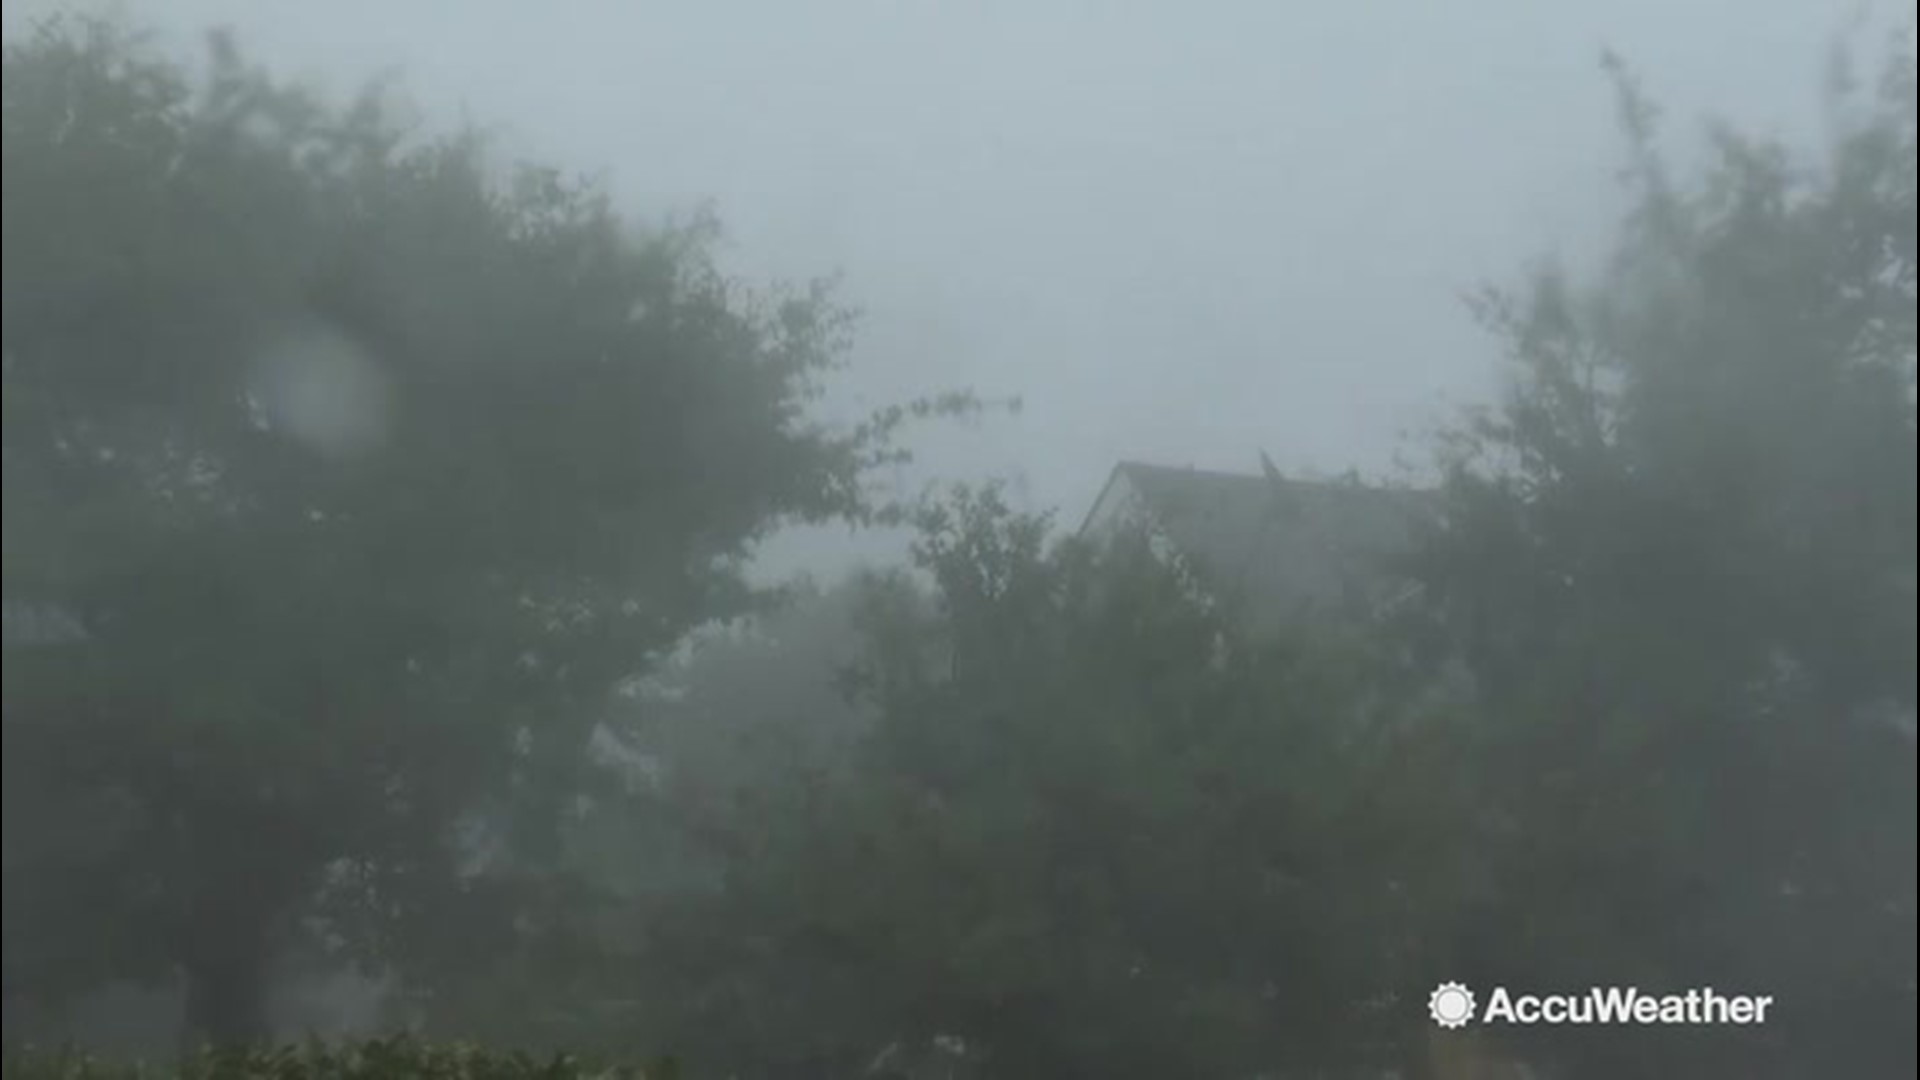 As Hurricane Dorian made landfall near Buxton, North Carolina, on Sept. 6, the surrounding foliage was battered around by the winds coming off the hurricane. Waves grew in size from the strong winds as well.